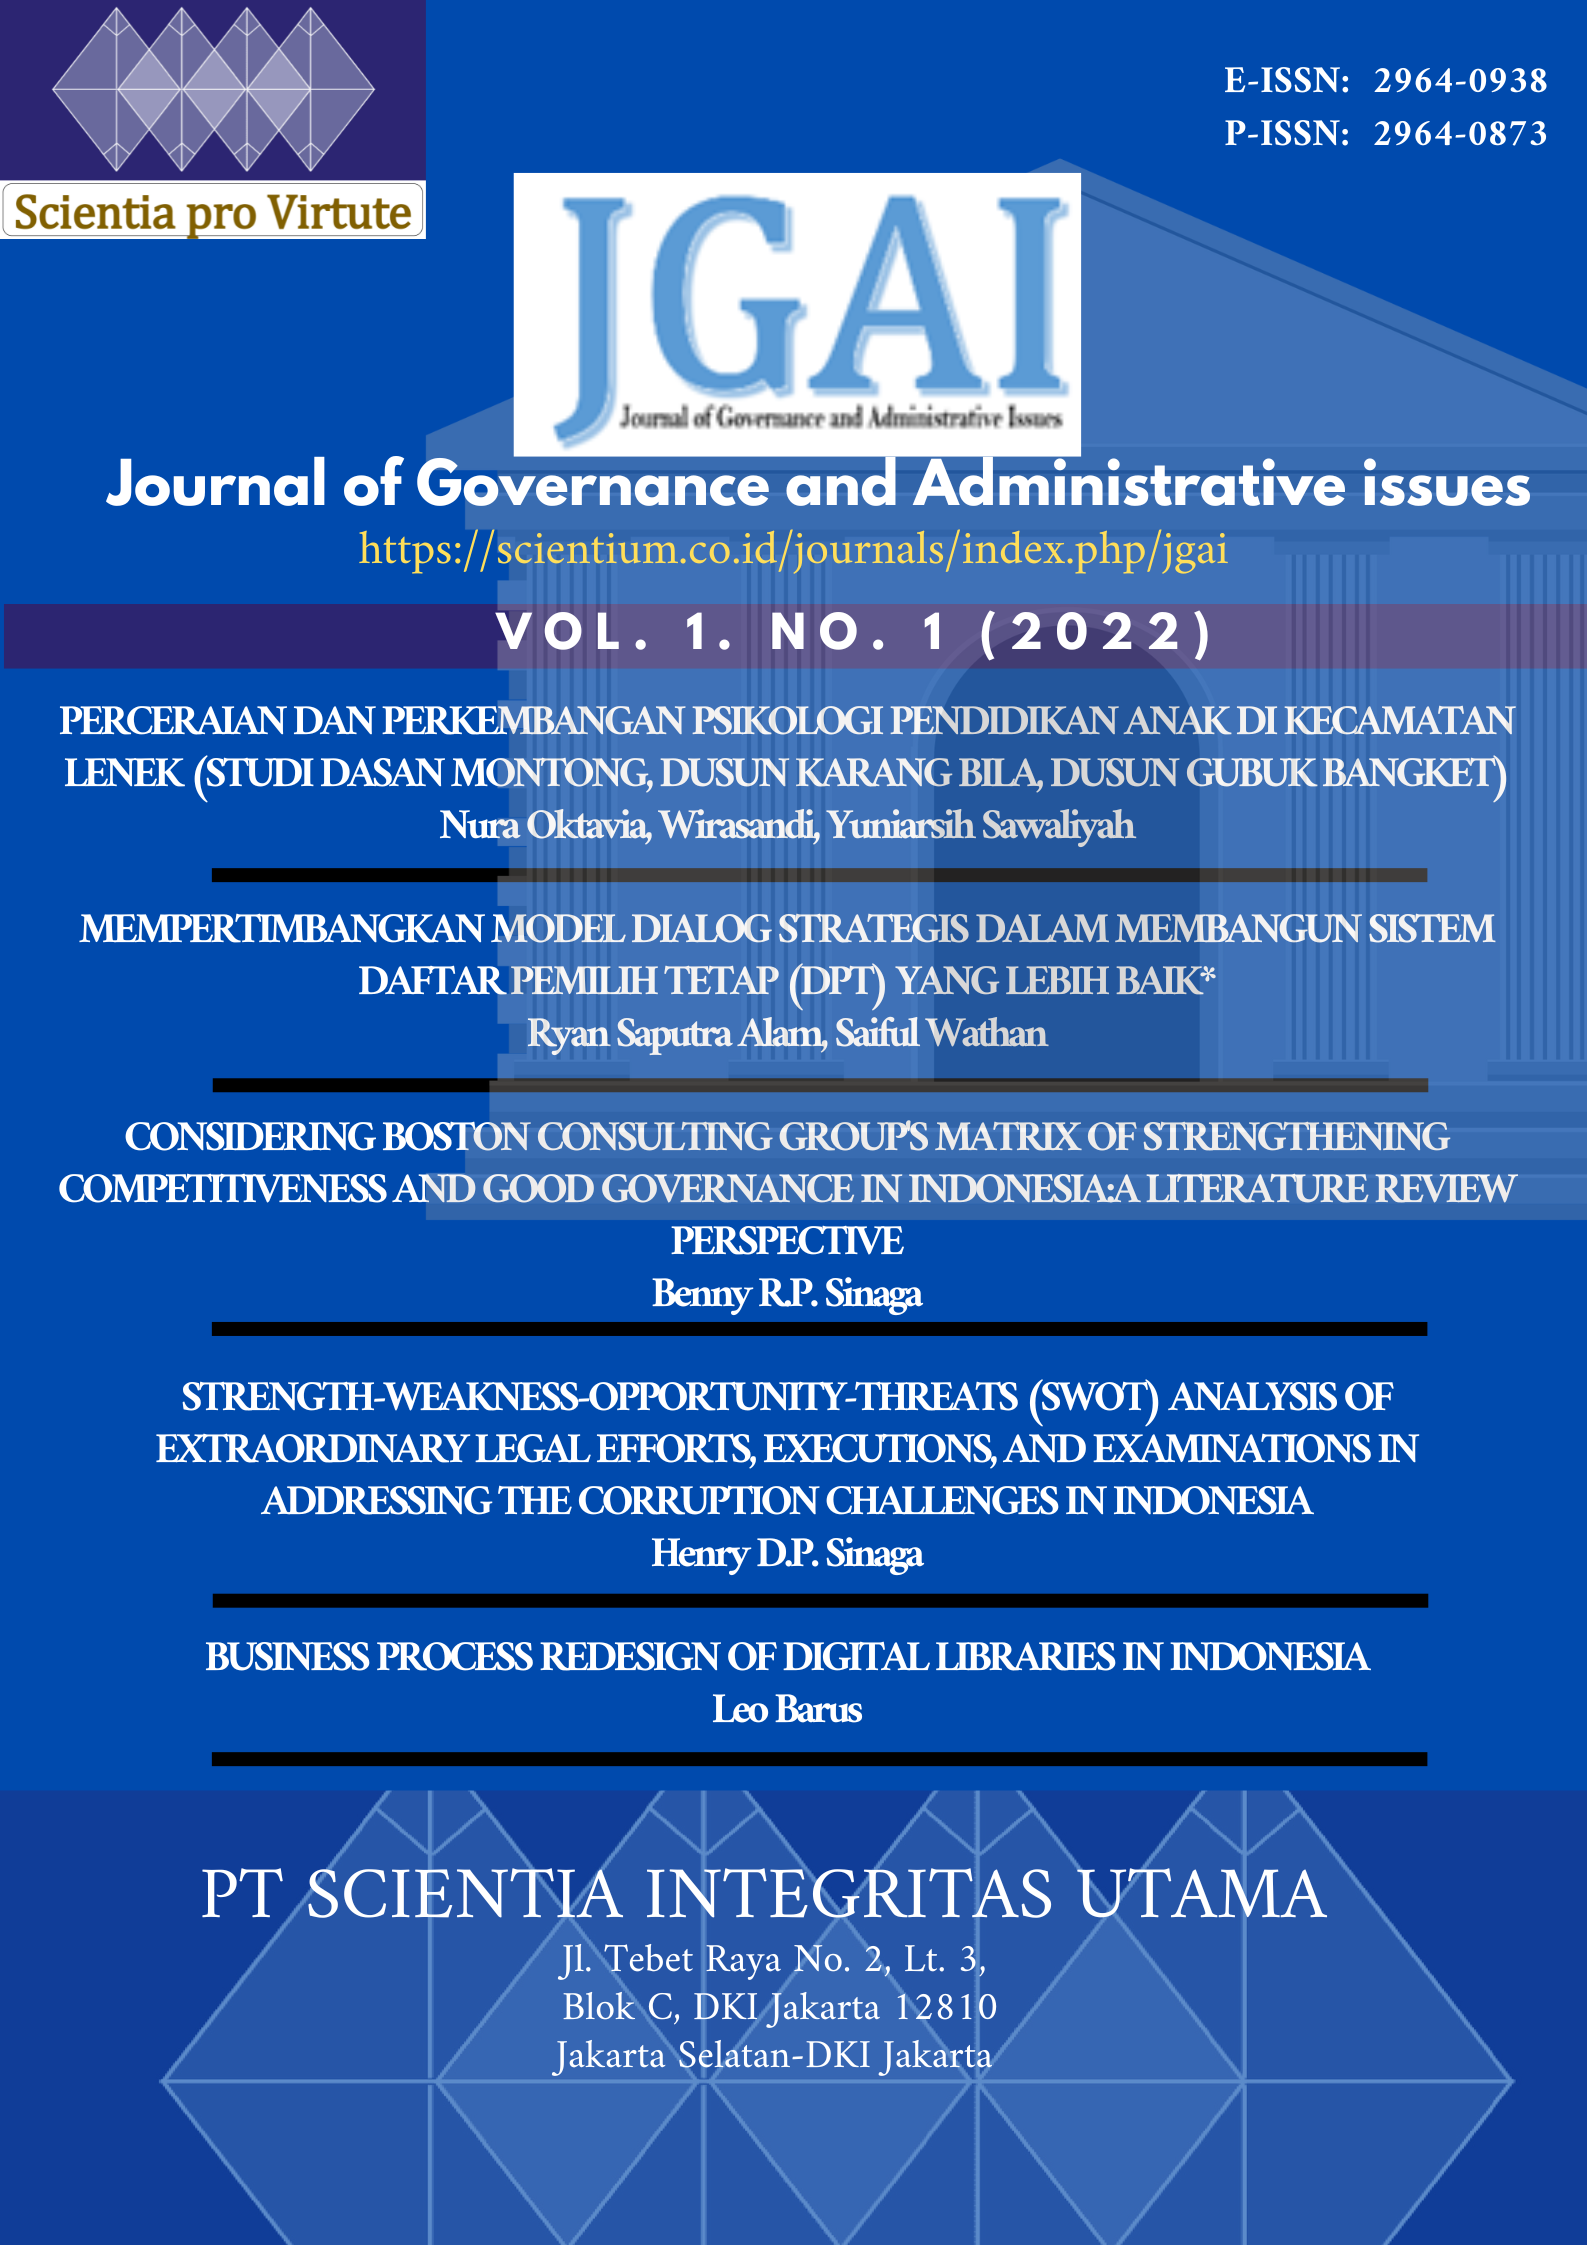 					View Vol. 1 No. 1 (2022):  Journal of Governance and Administrative Issues
				